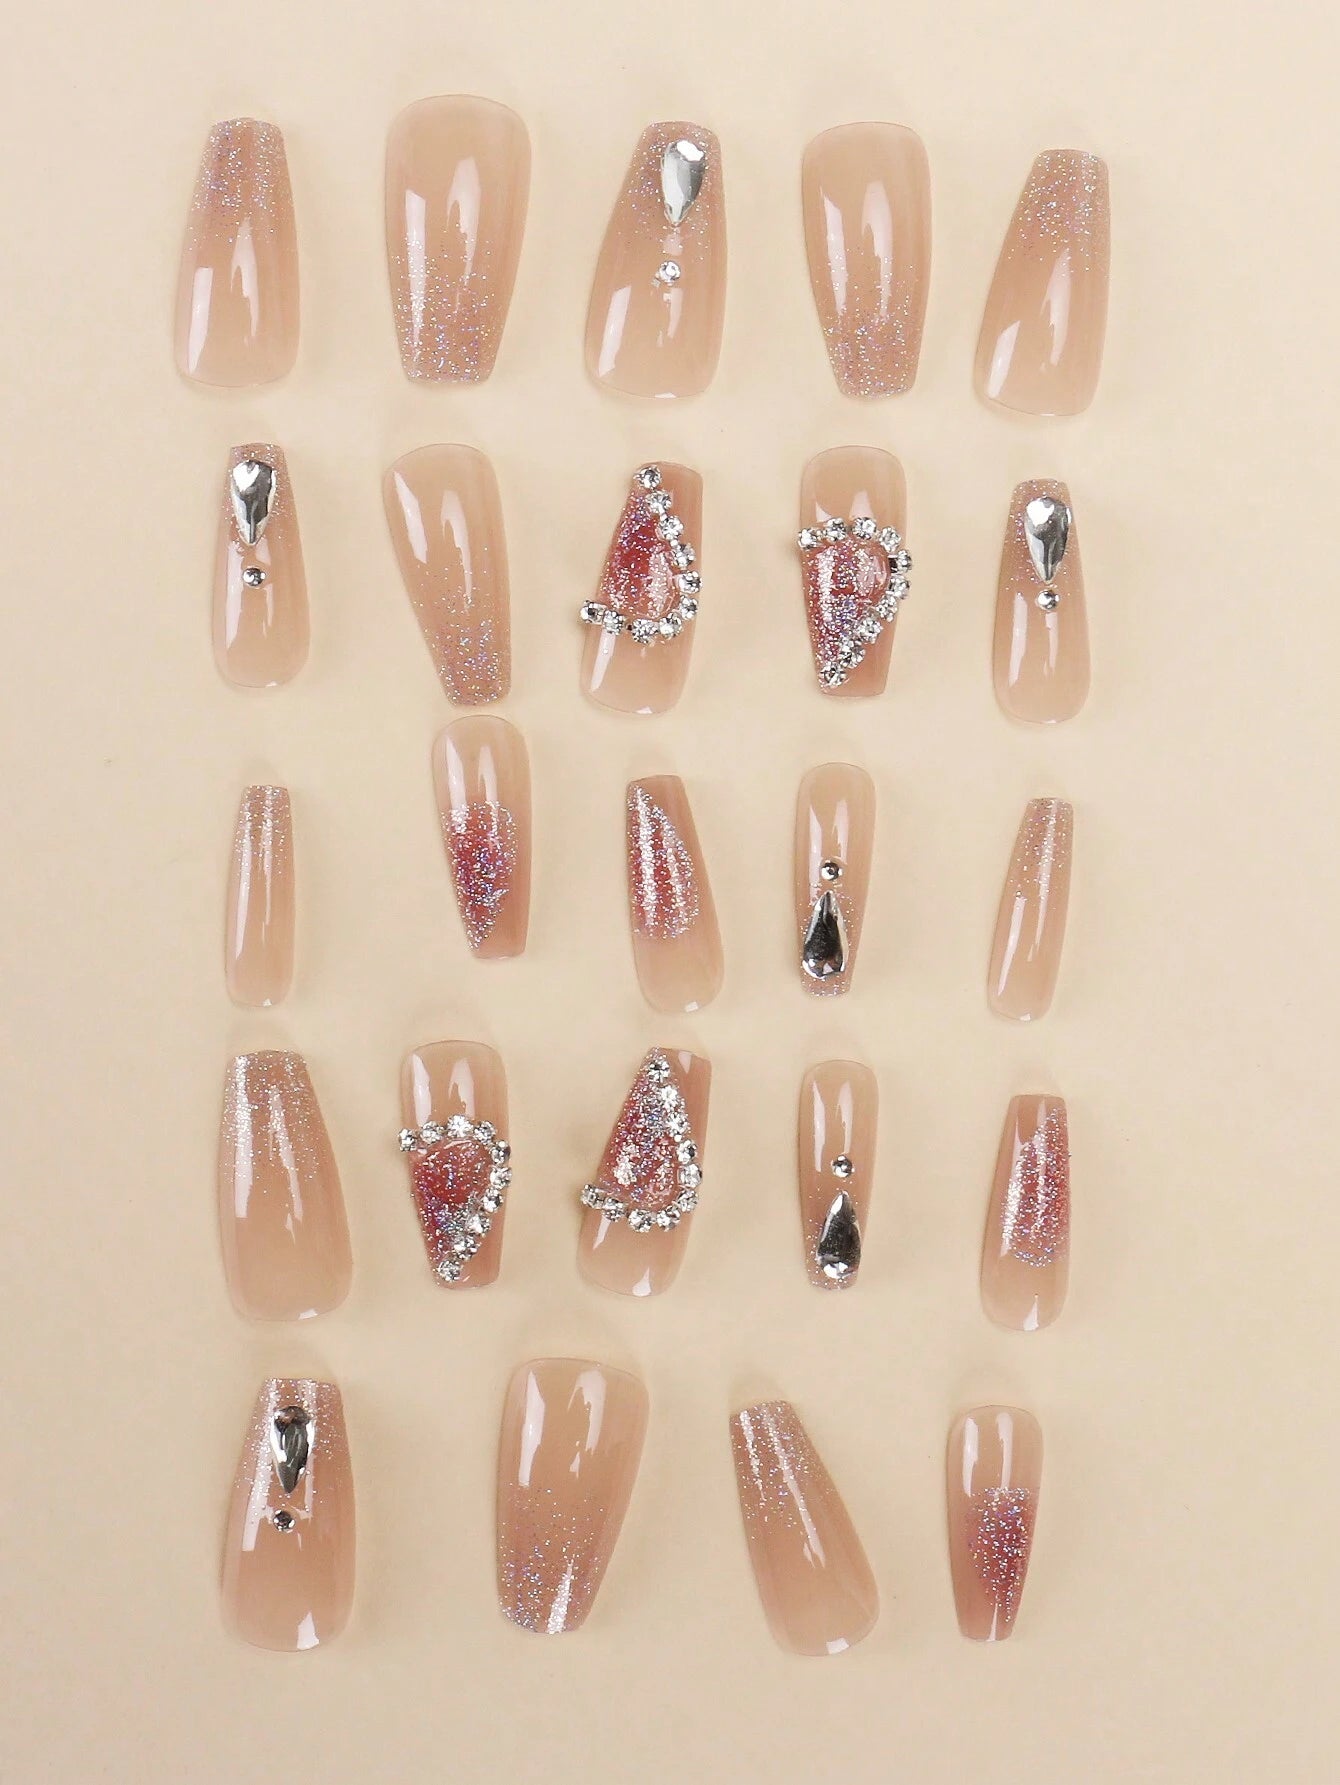 24pcs Short Coffin-shaped Metallic Foil Nail Tips Y2K Holographic Glitter Pearlescent Finishes False Nails